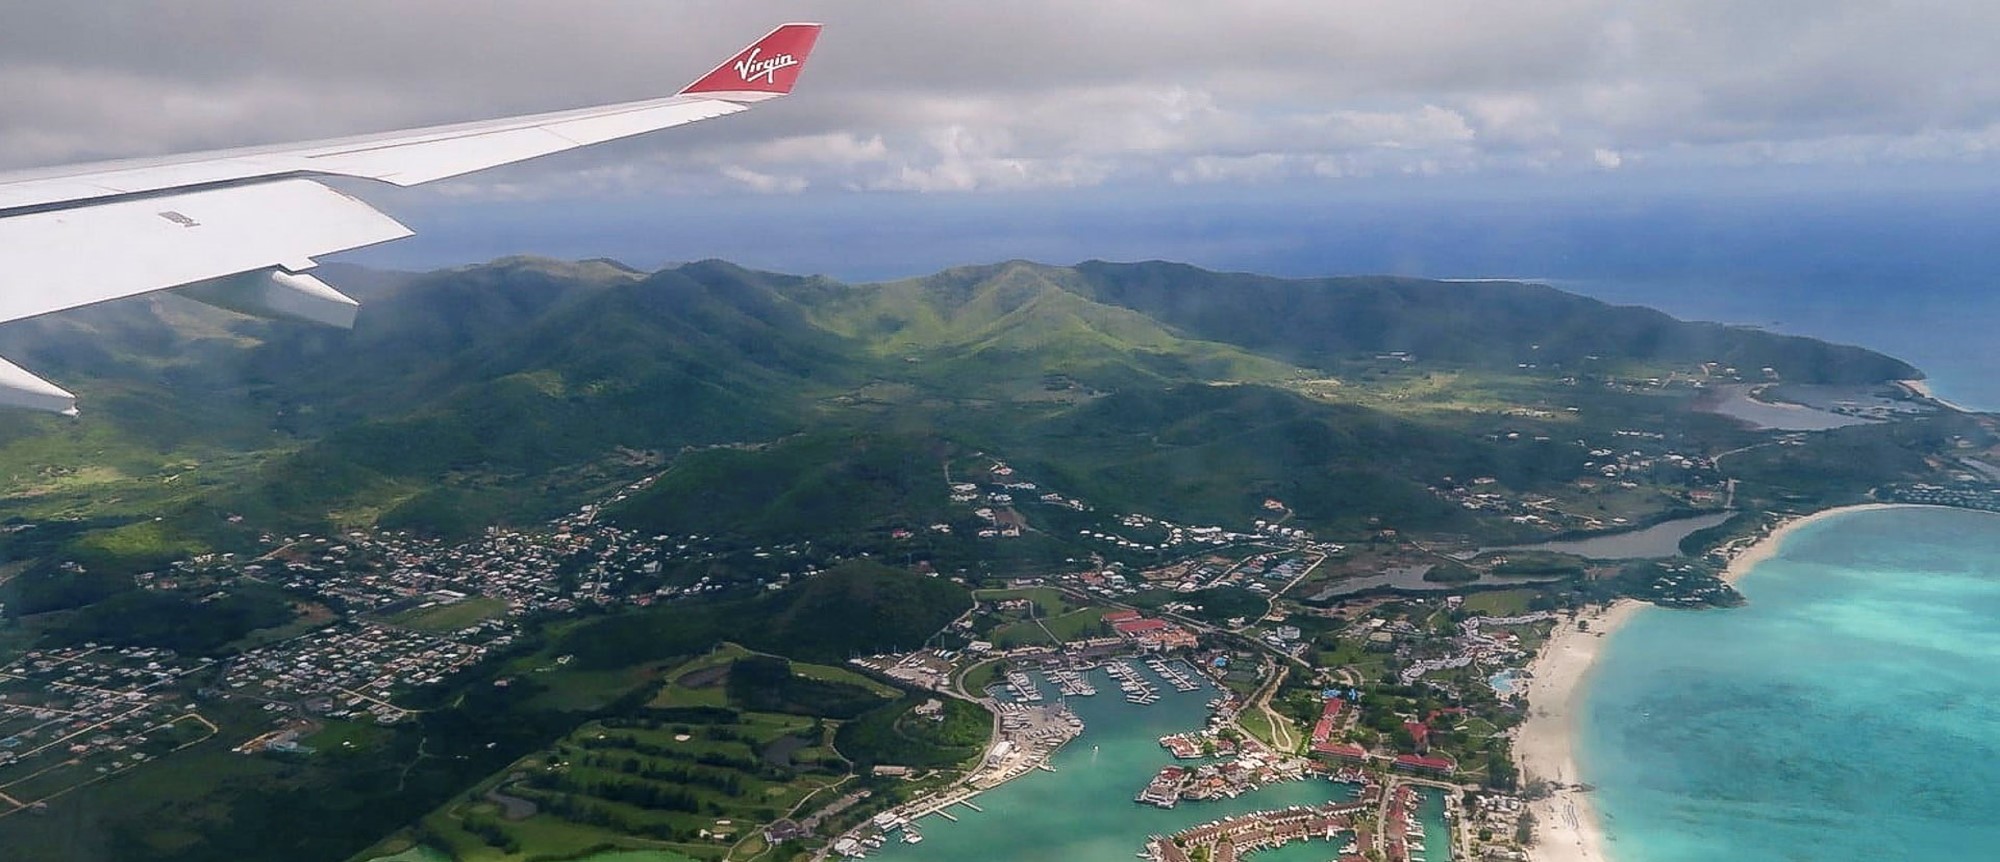 Antigua from the air